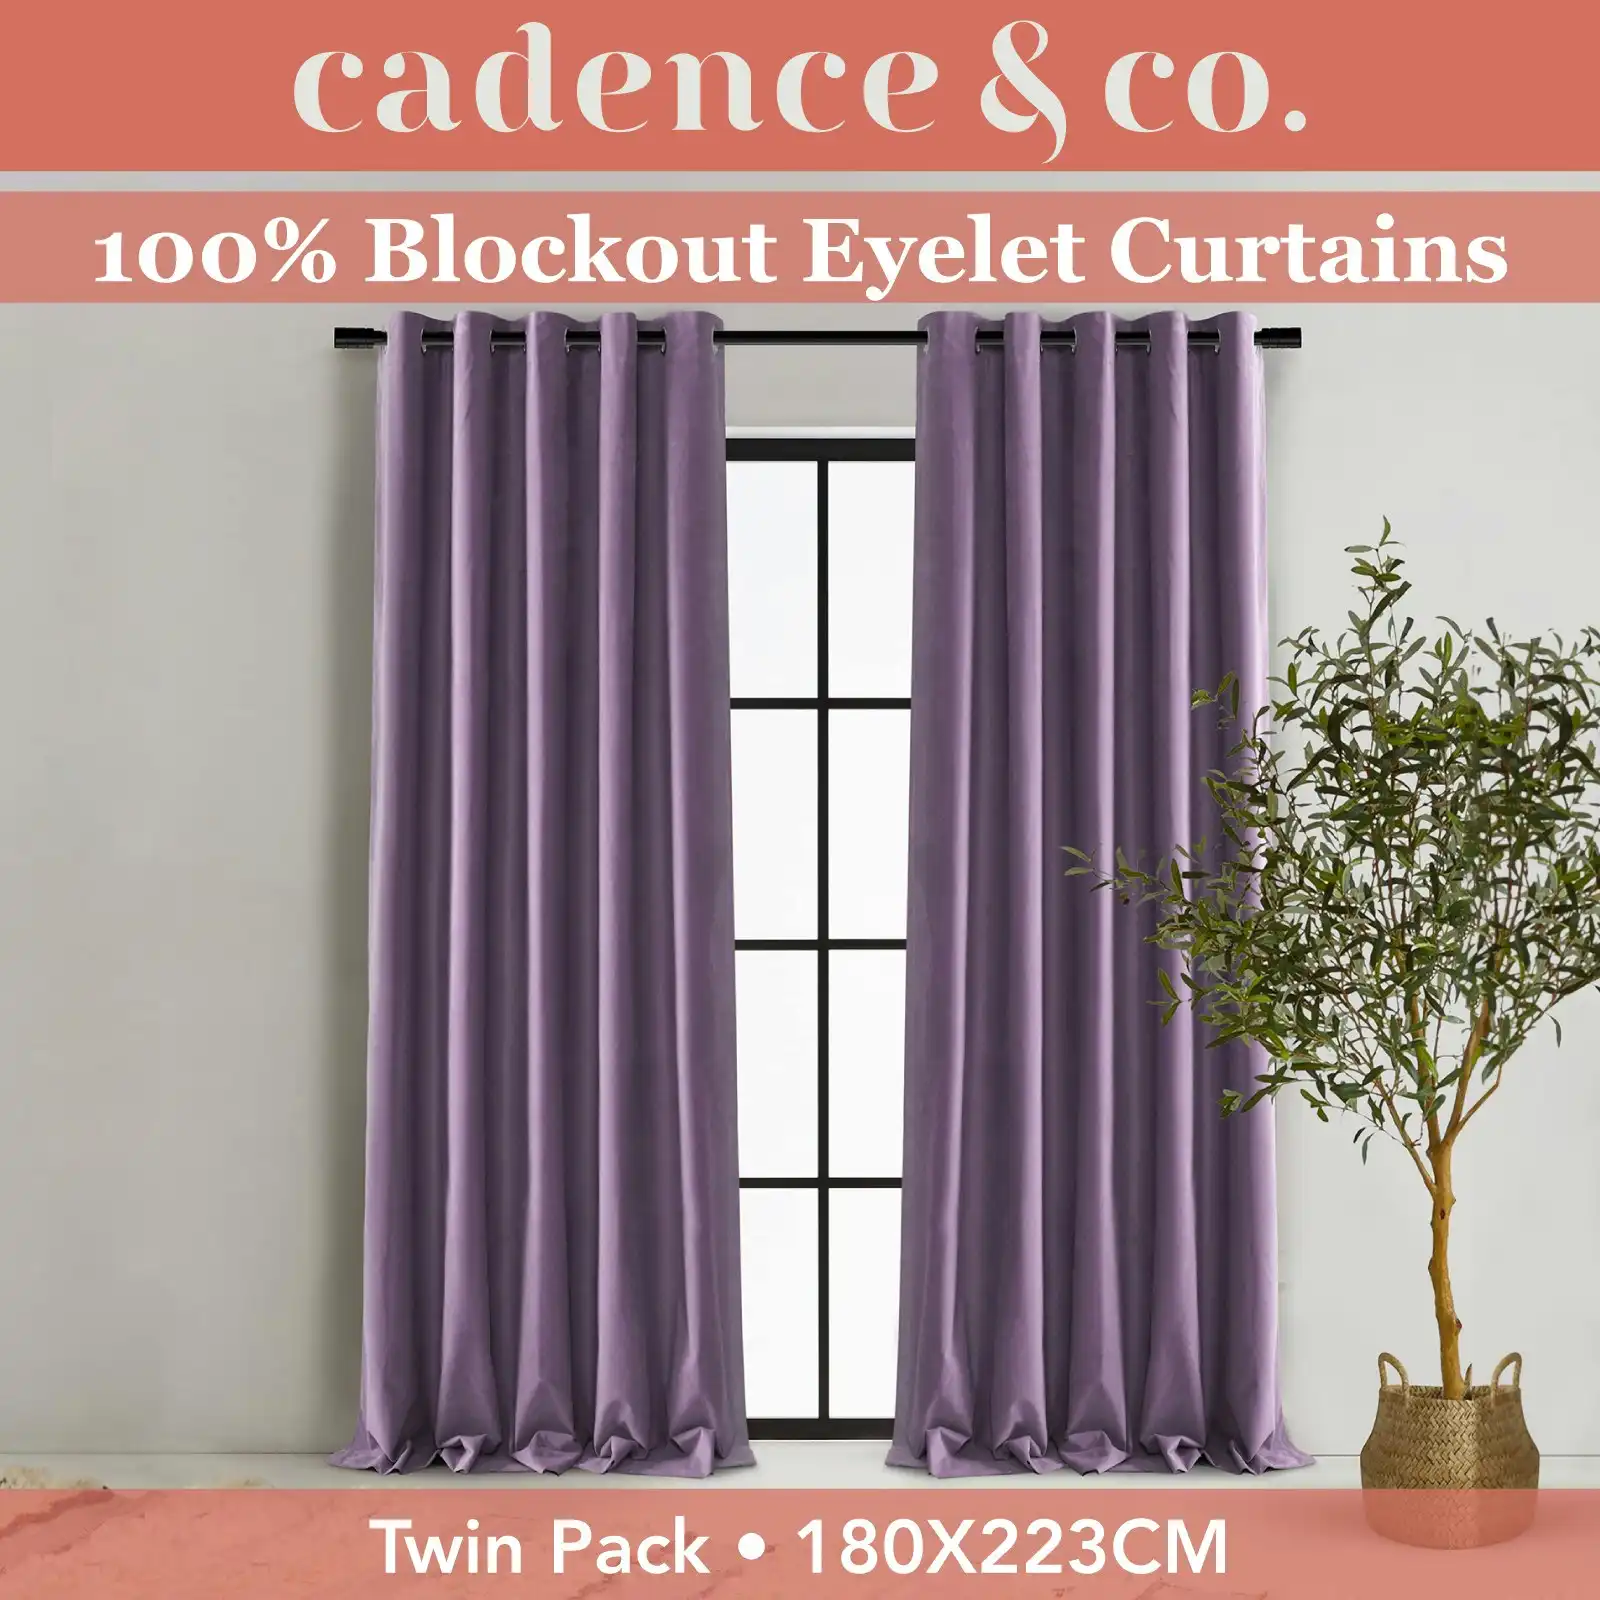 Cadence & Co Byron Matte Velvet 100% Blockout Eyelet Curtains Twin Pack Lilac 180x223cm